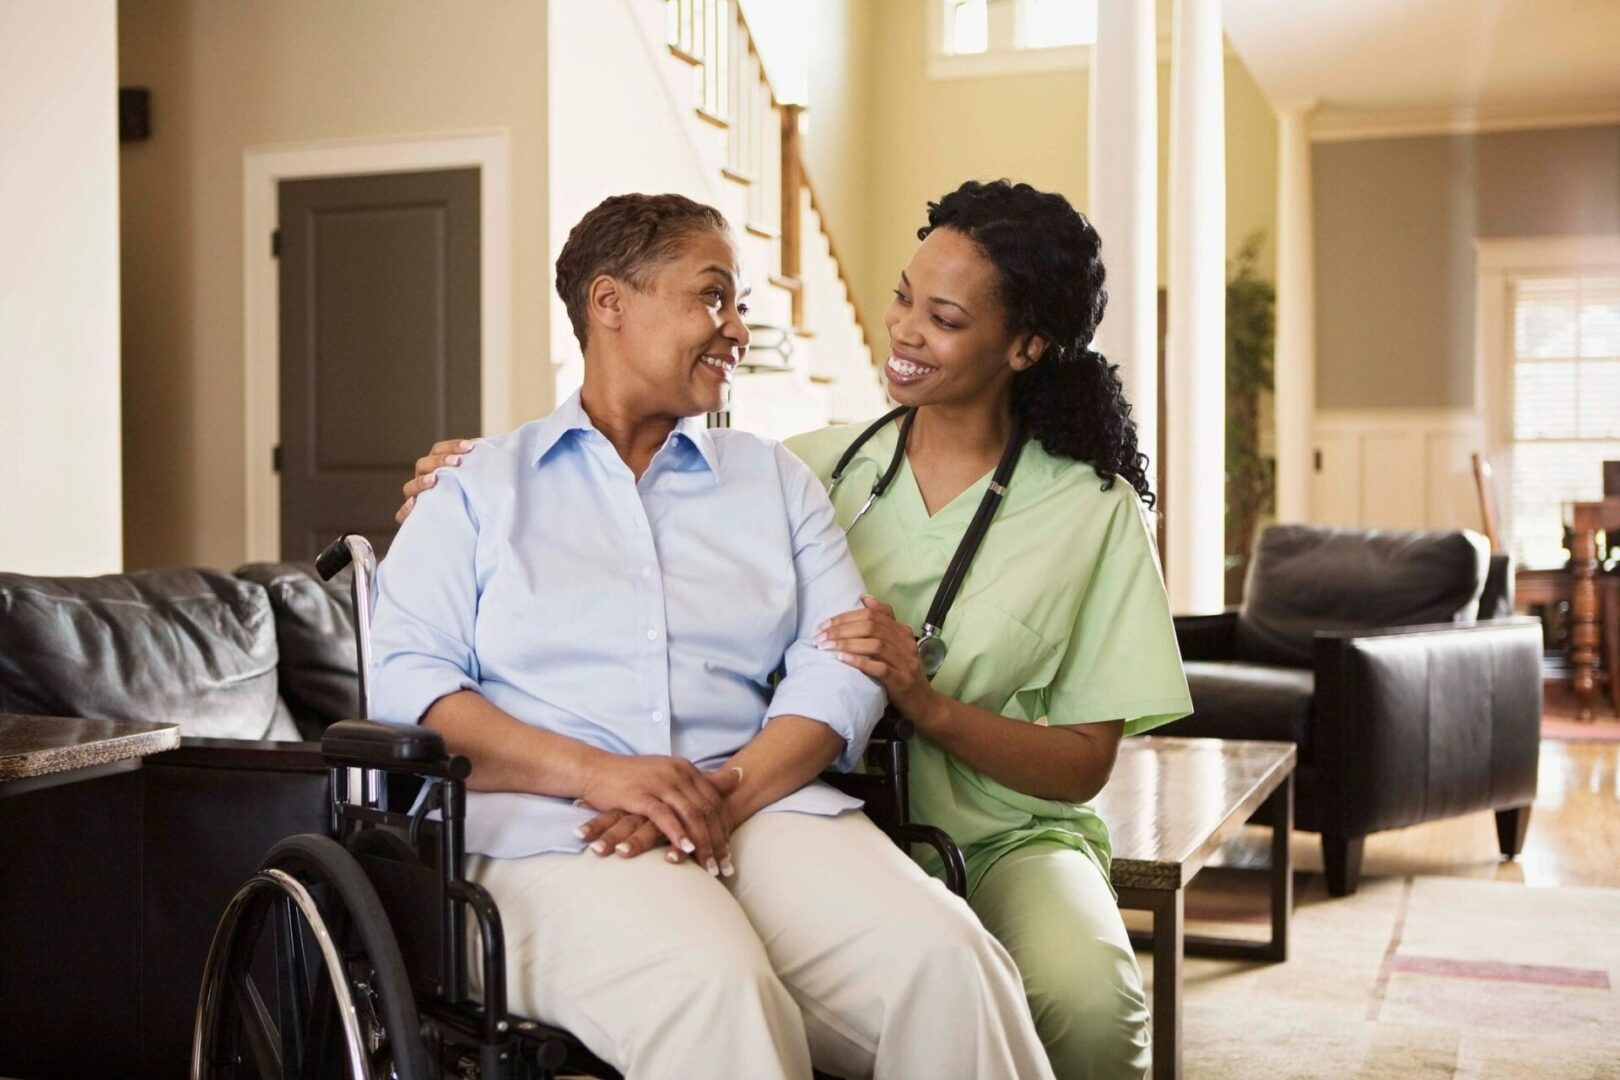 Nurse and Patient in a wheelchair smile at each other